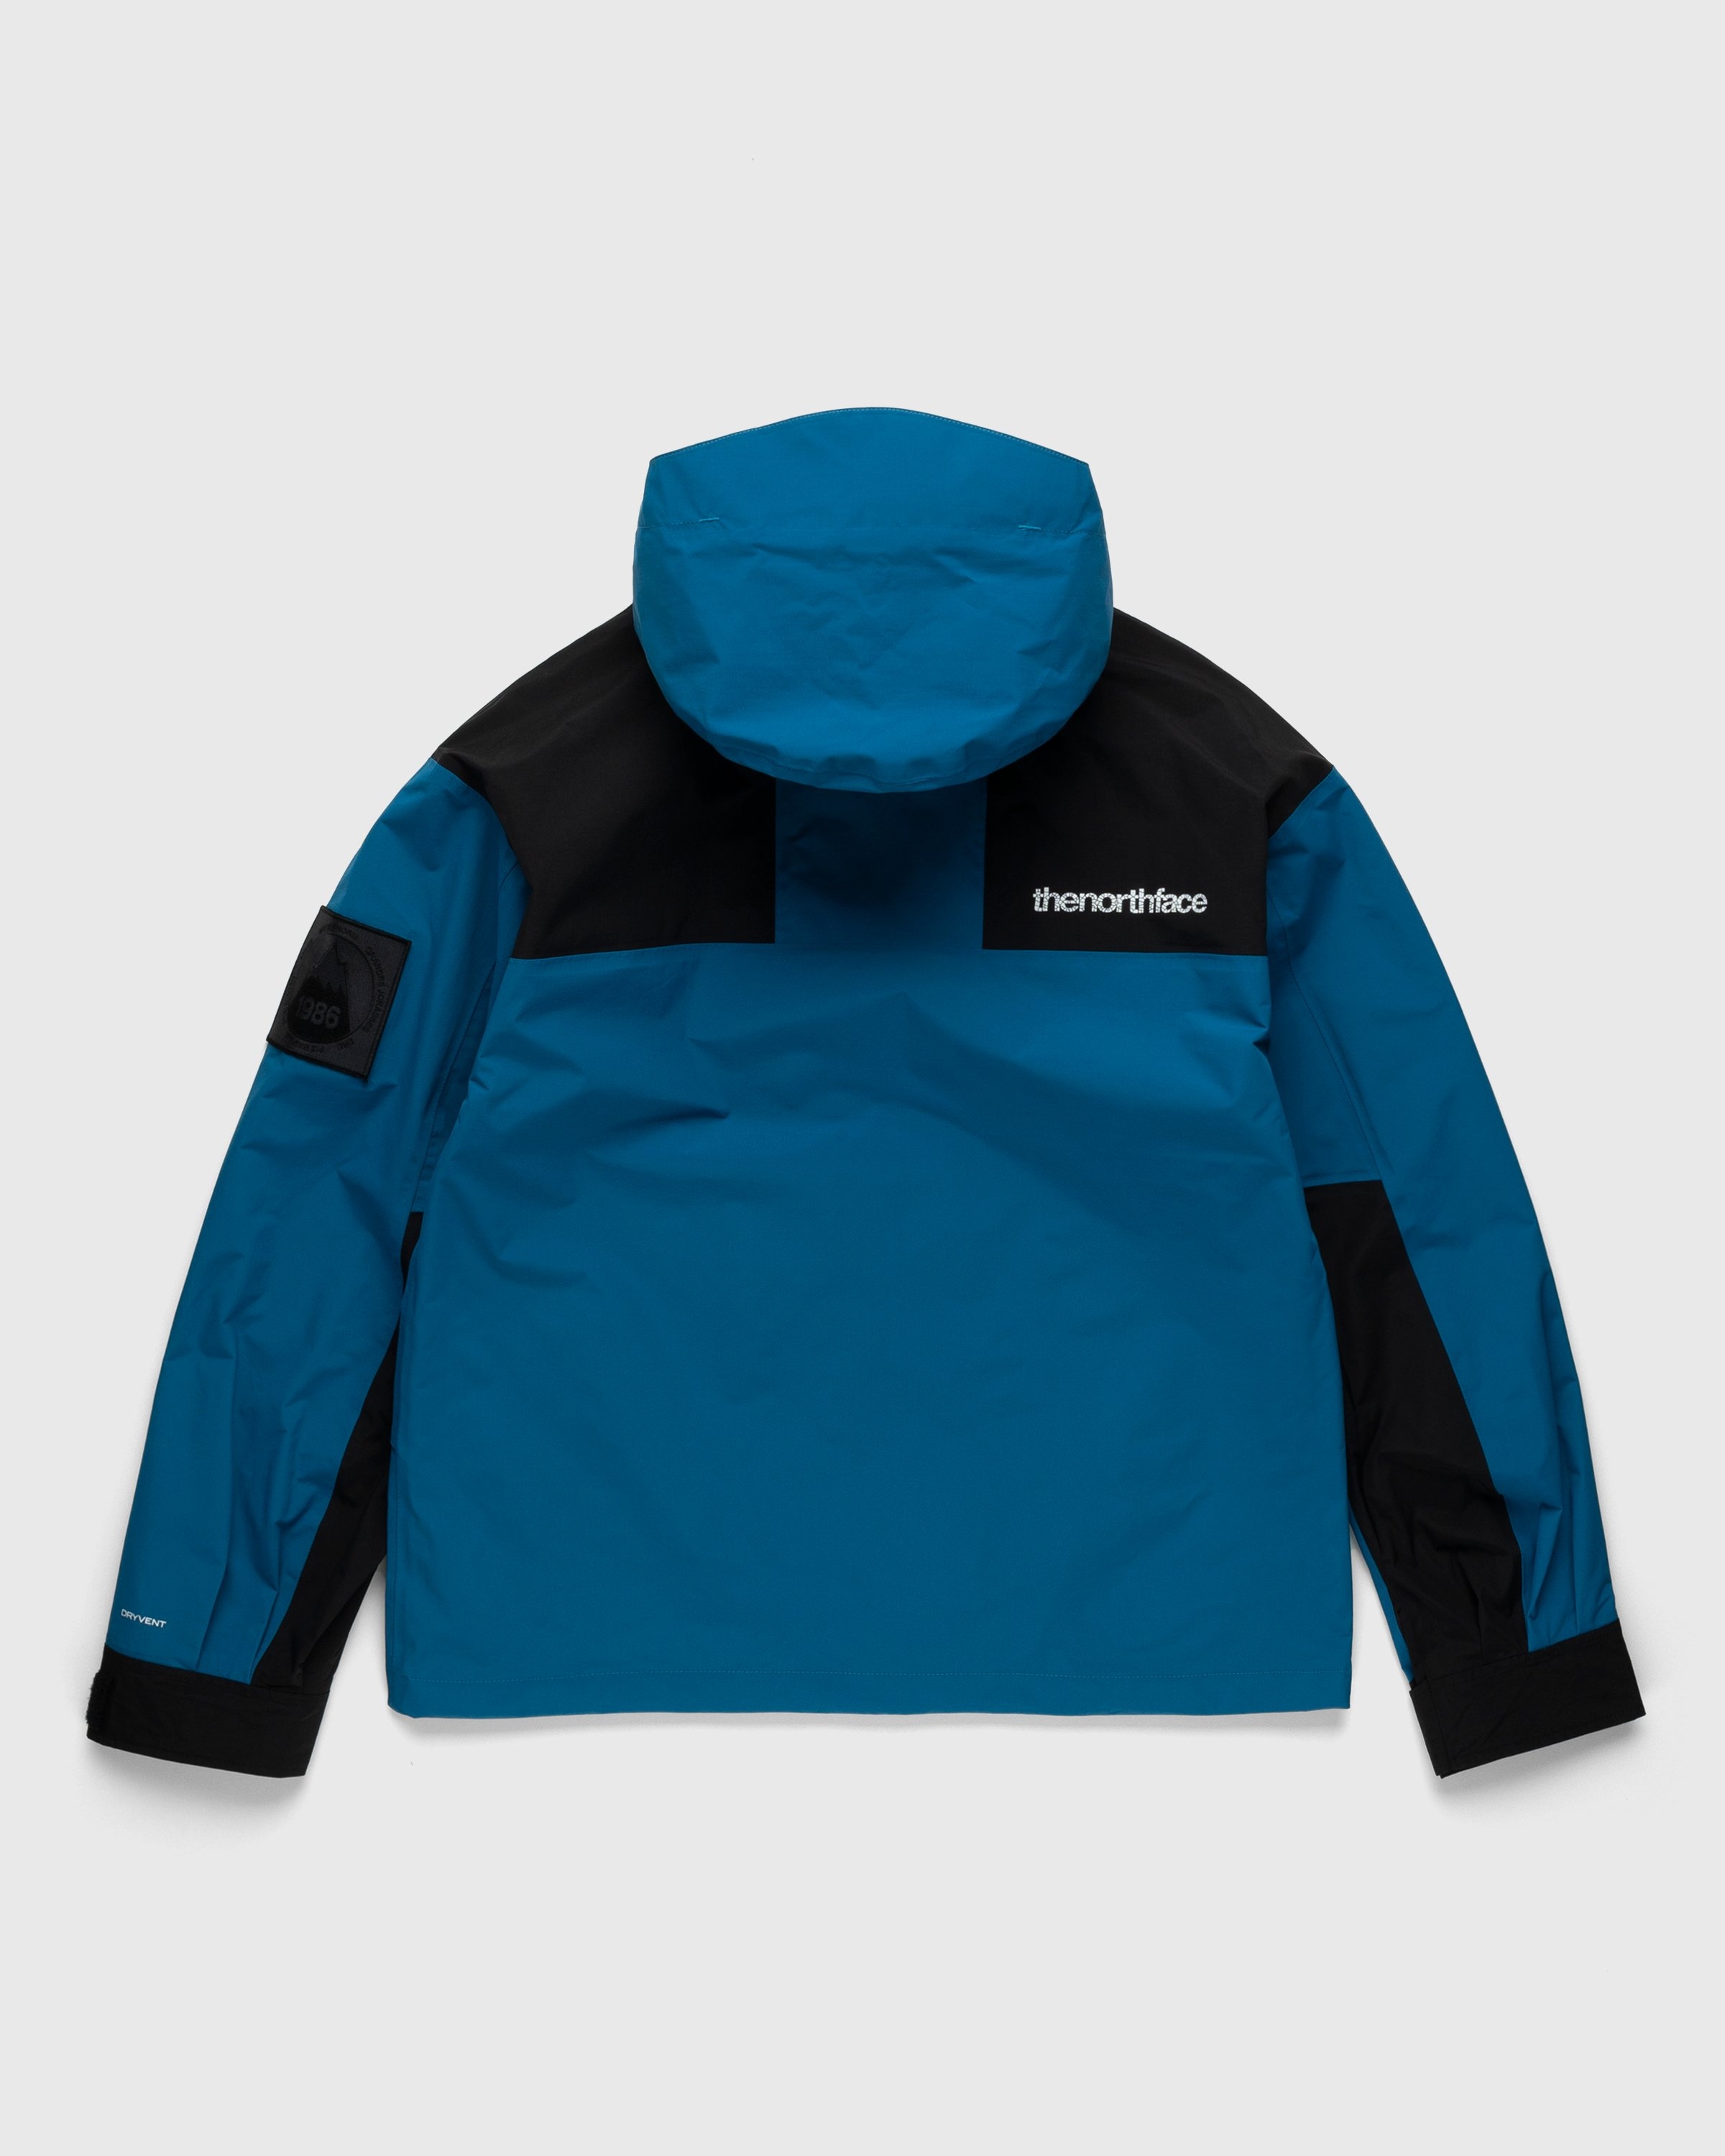 The North Face Mountain Jacket  M